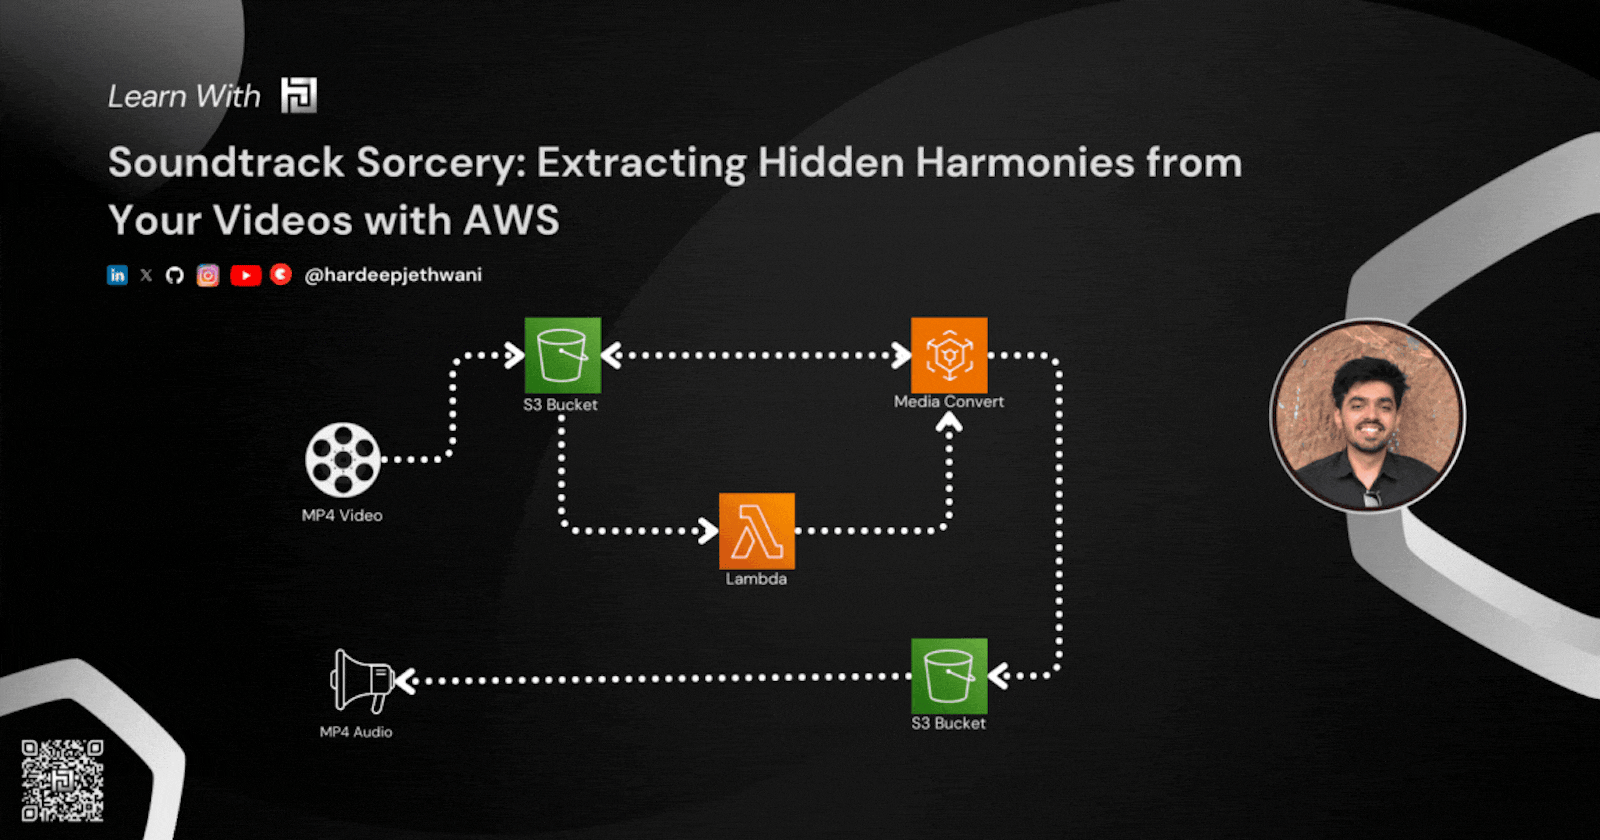 Soundtrack Sorcery: Extracting Hidden Harmonies from Your Videos with AWS